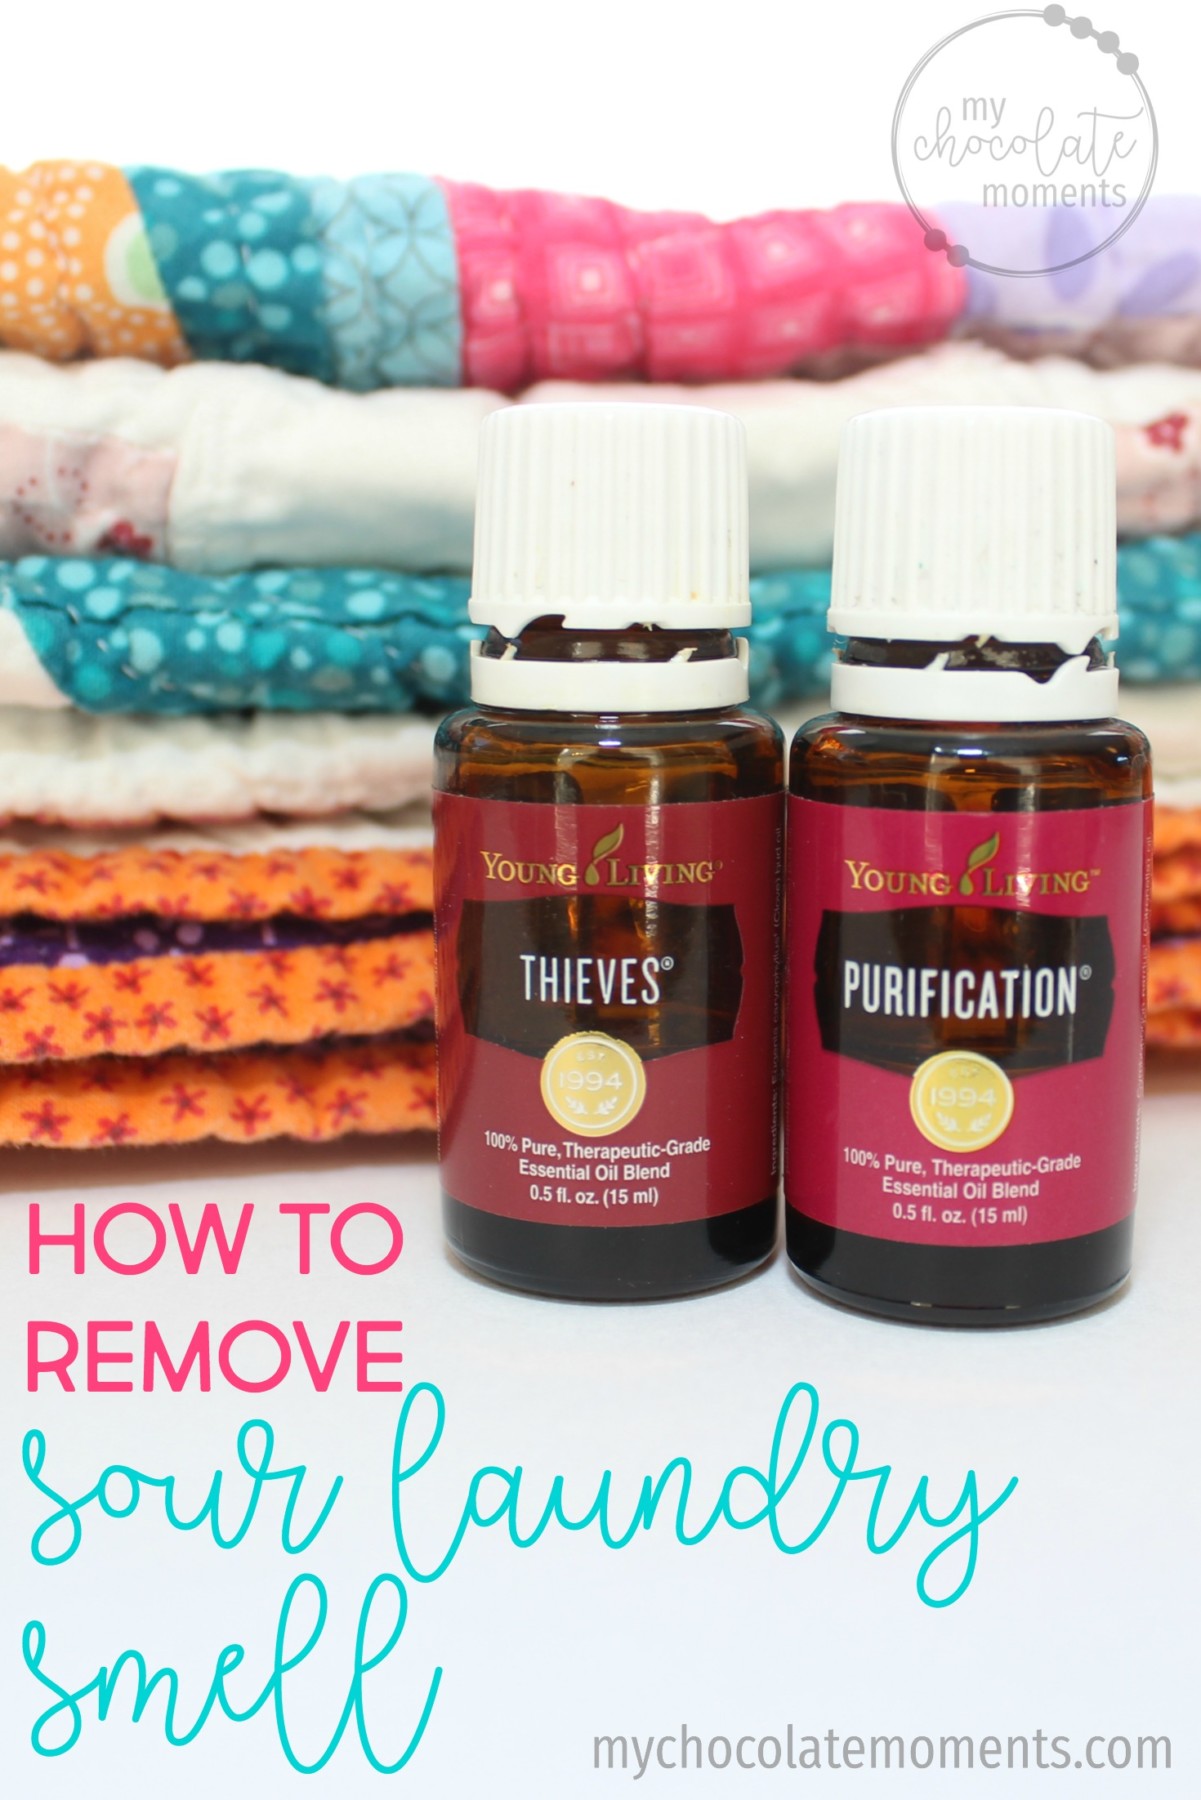 How to remove soured laundry smell